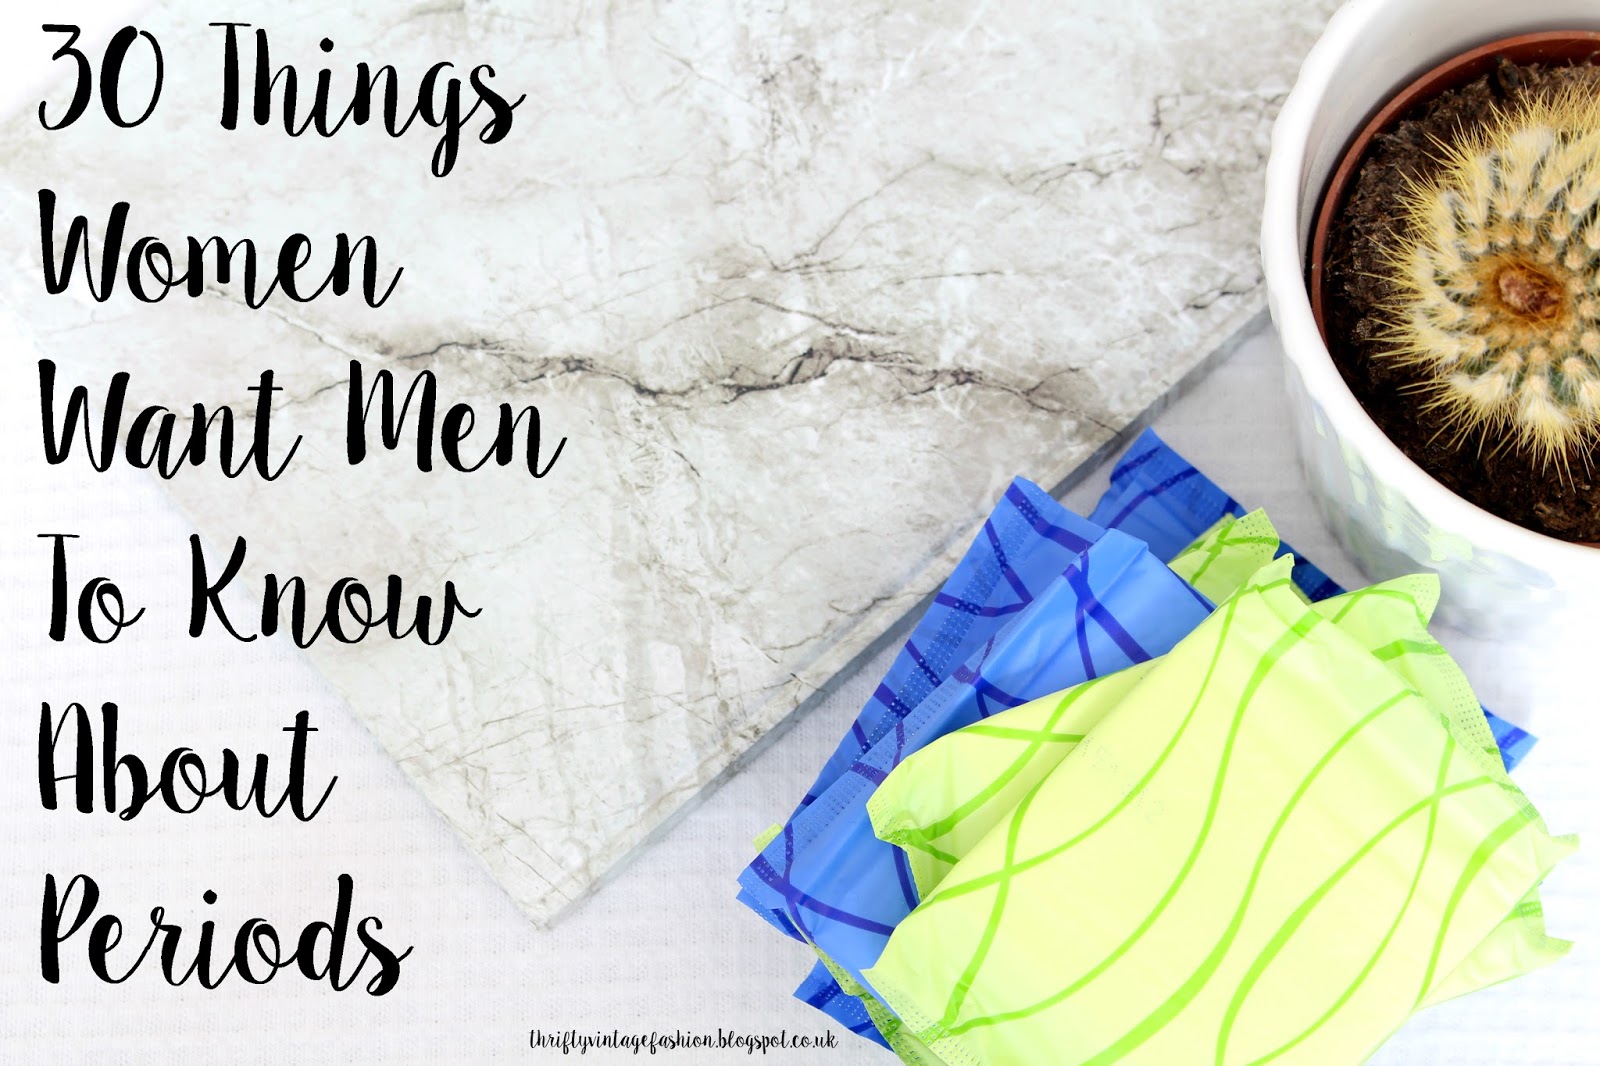 30 Things Women Want Men To Know About Periods pride positive lifestyle UK blogger blogging lists